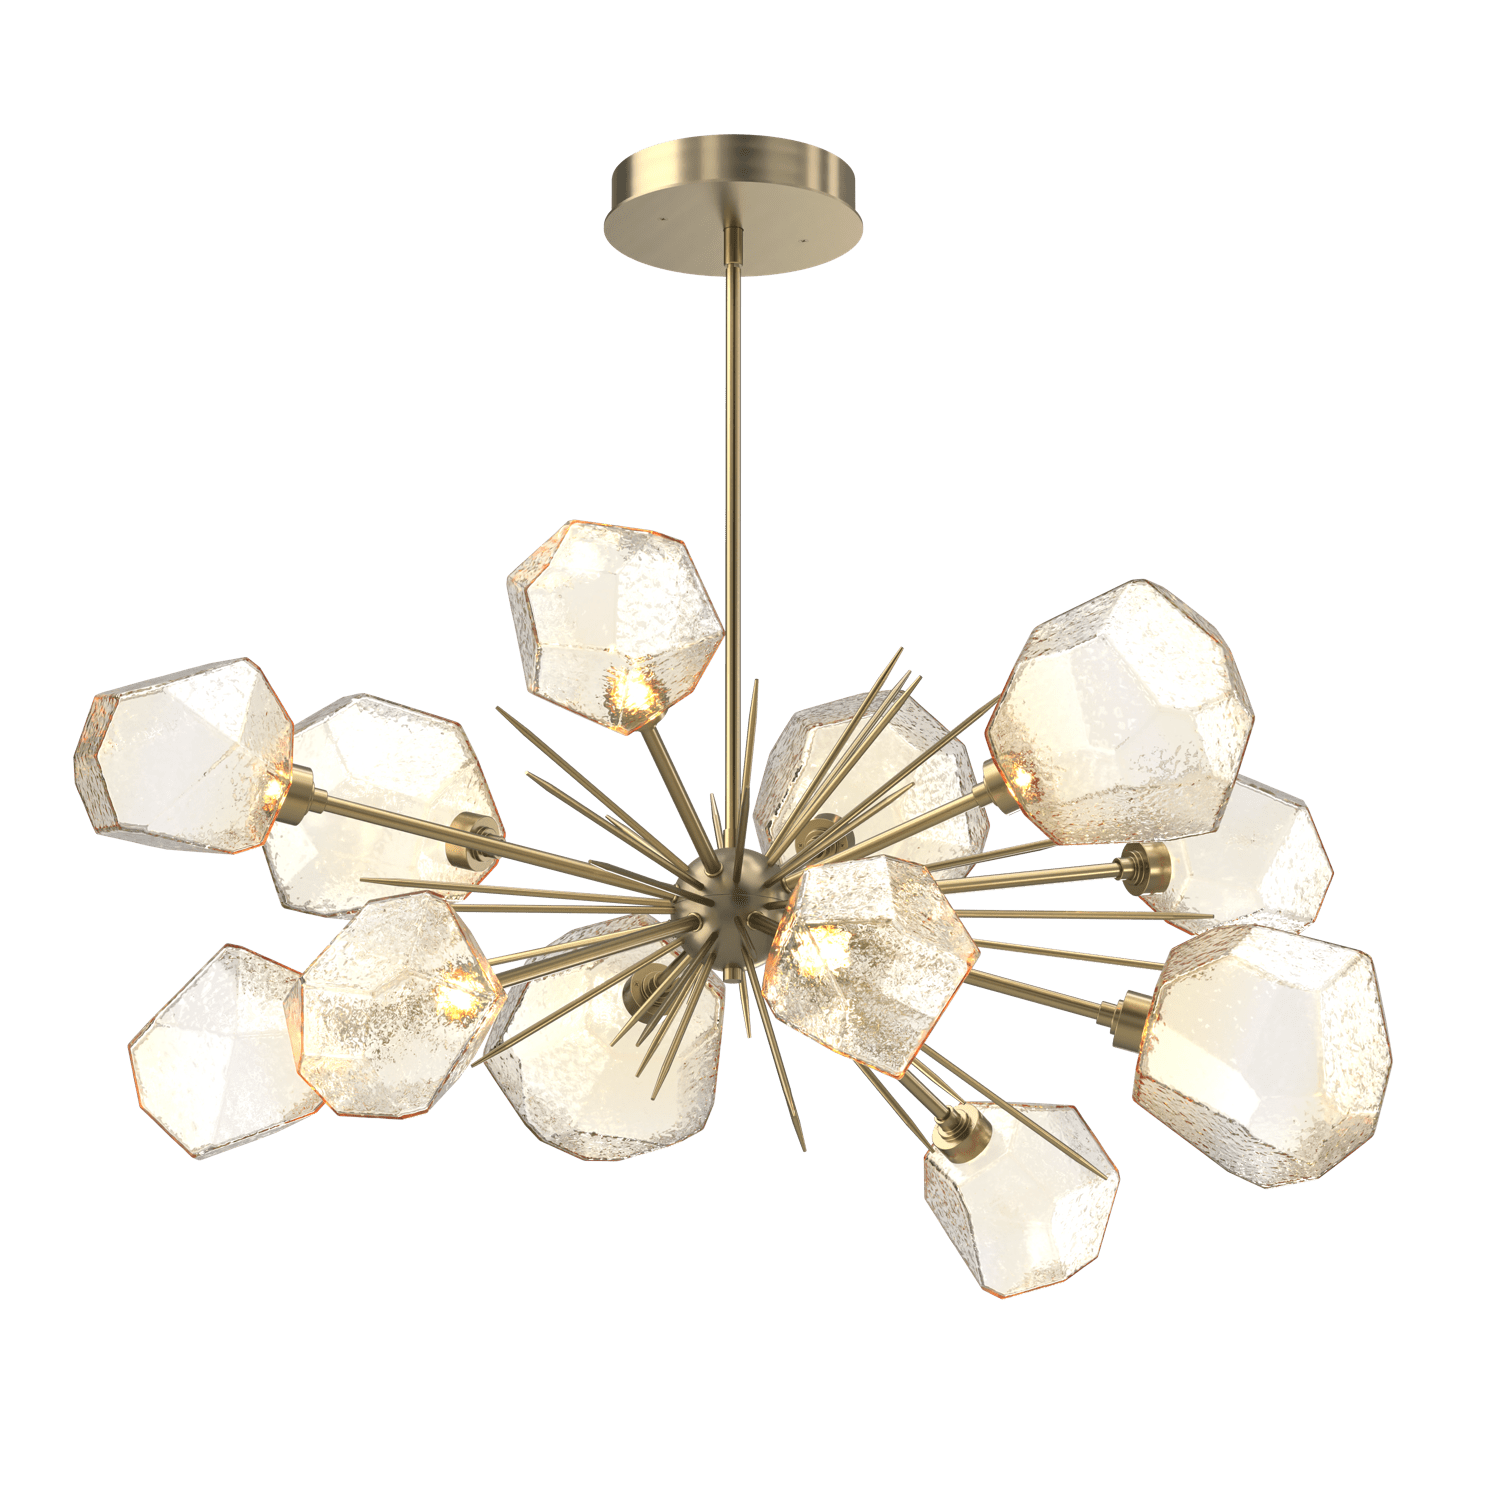 PLB0039-0D-HB-A-Hammerton-Studio-Gem-43-inch-oval-starburst-chandelier-with-heritage-brass-finish-and-amber-blown-glass-shades-and-LED-lamping